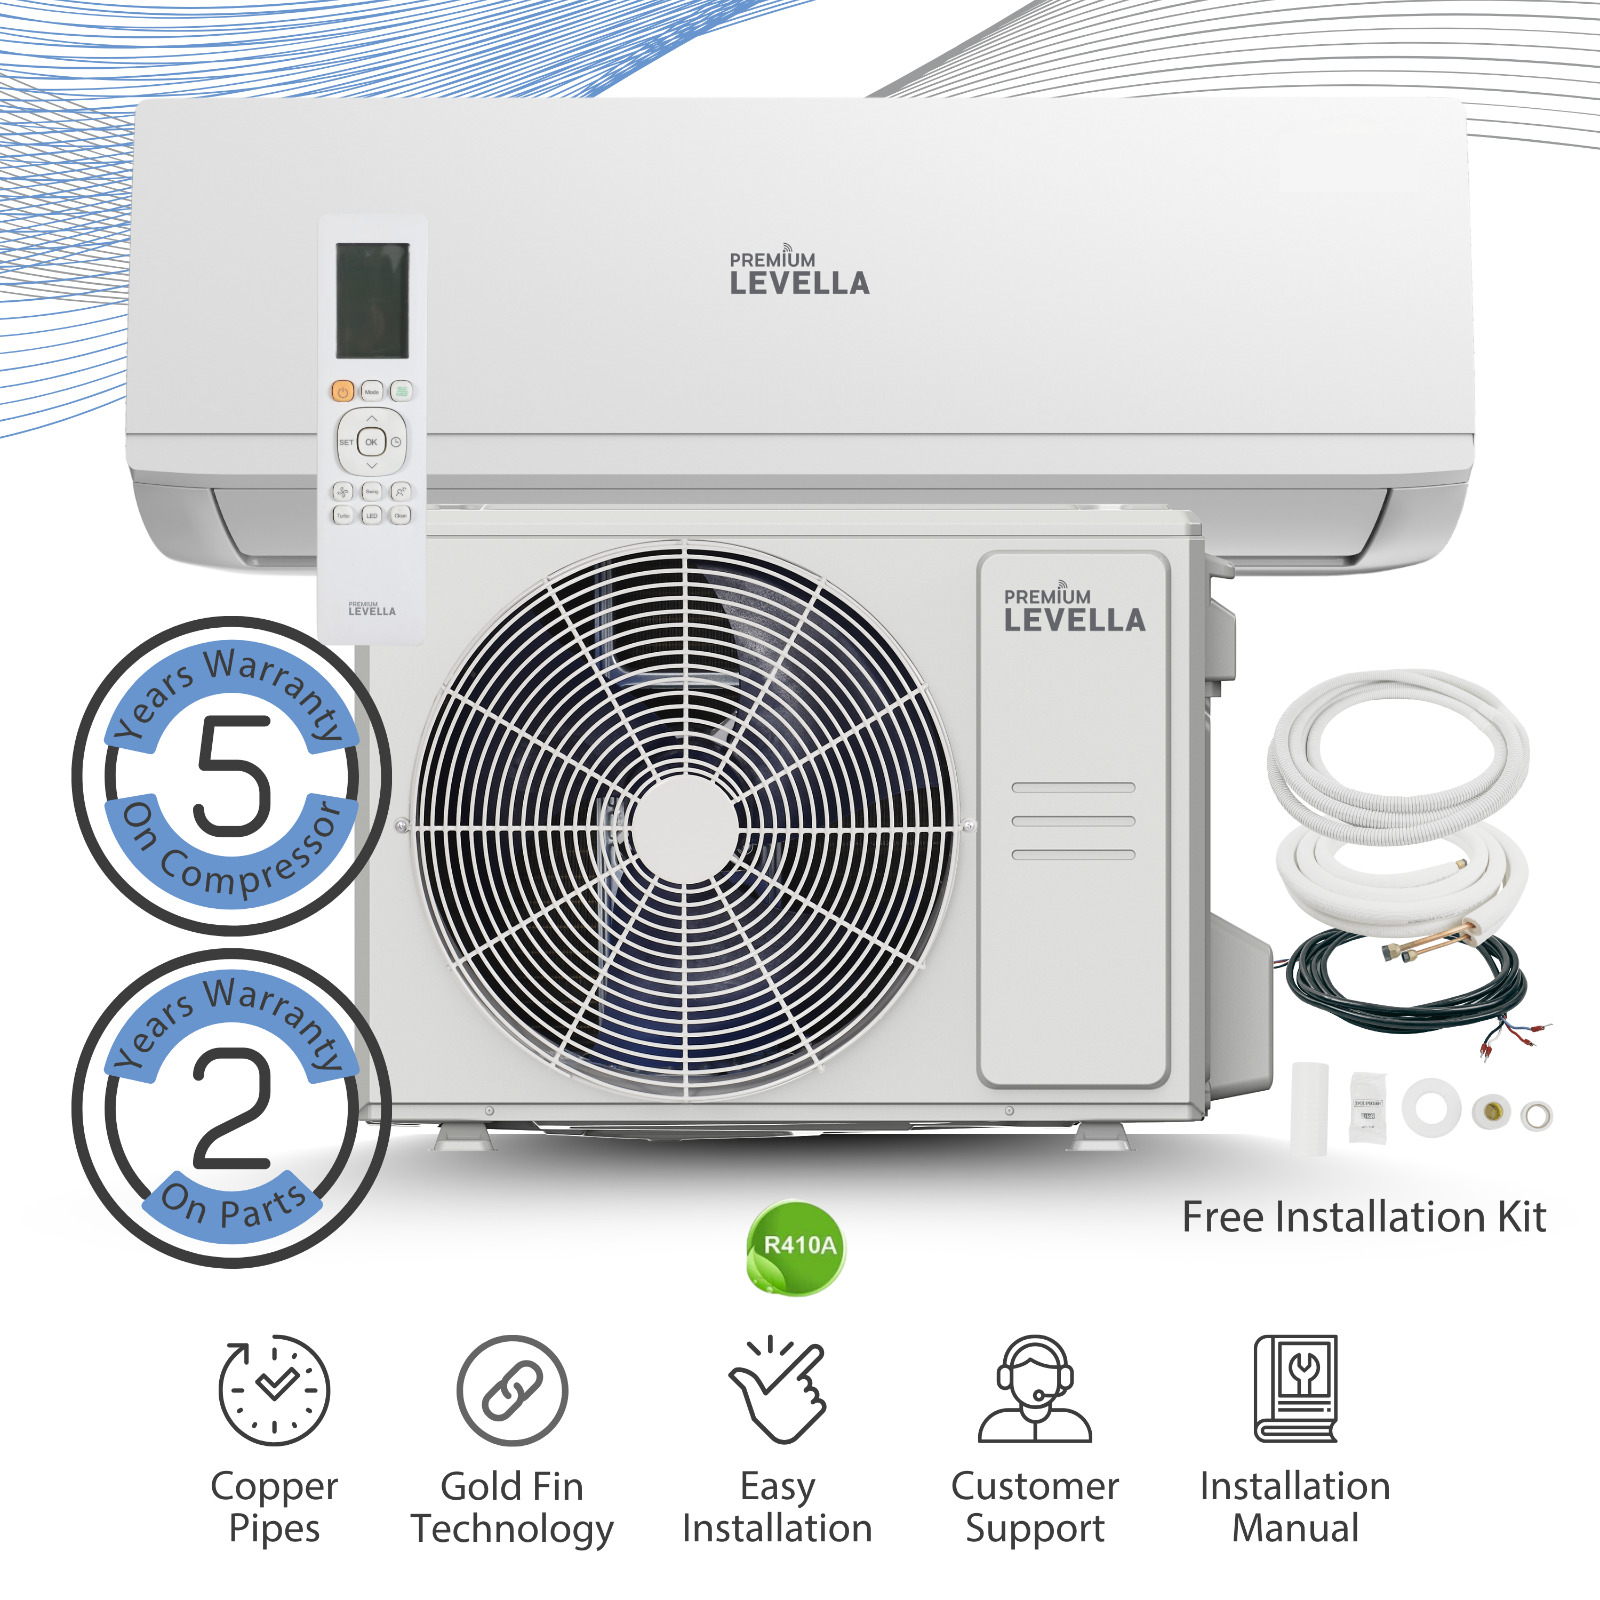 12000 BTU Air Conditioner Mini Split 16.9 SEER AC Ductless ONLY COLD 220V